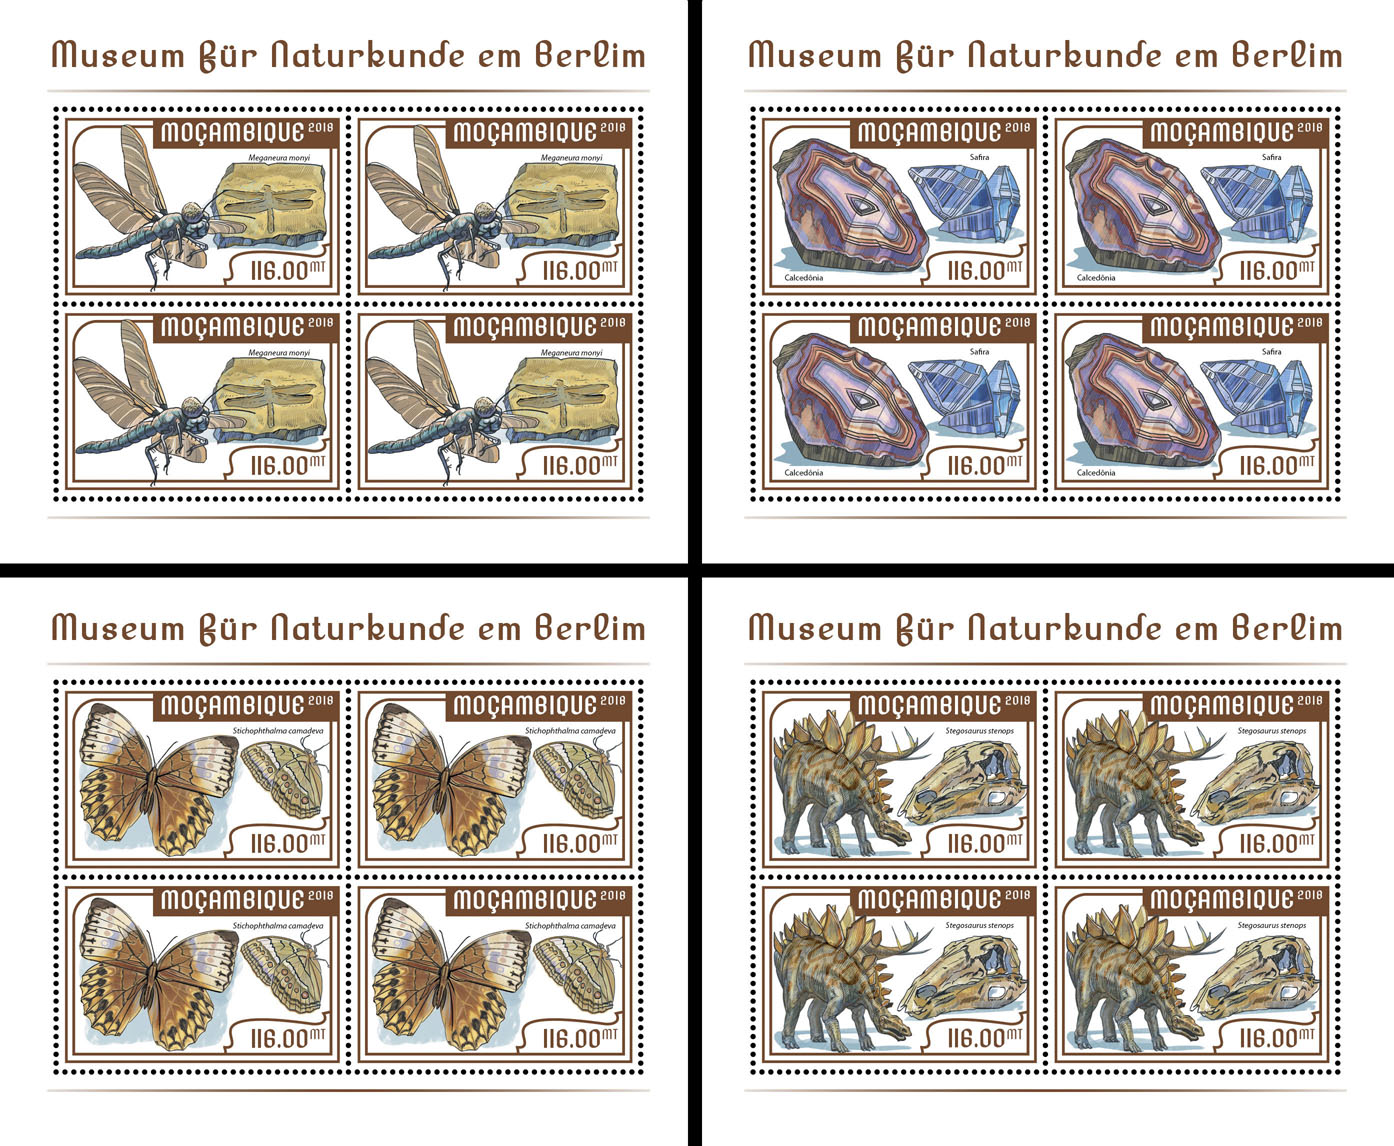 Museum in Berlin (4 sets of 4 stamps) - Issue of Mozambique postage Stamps